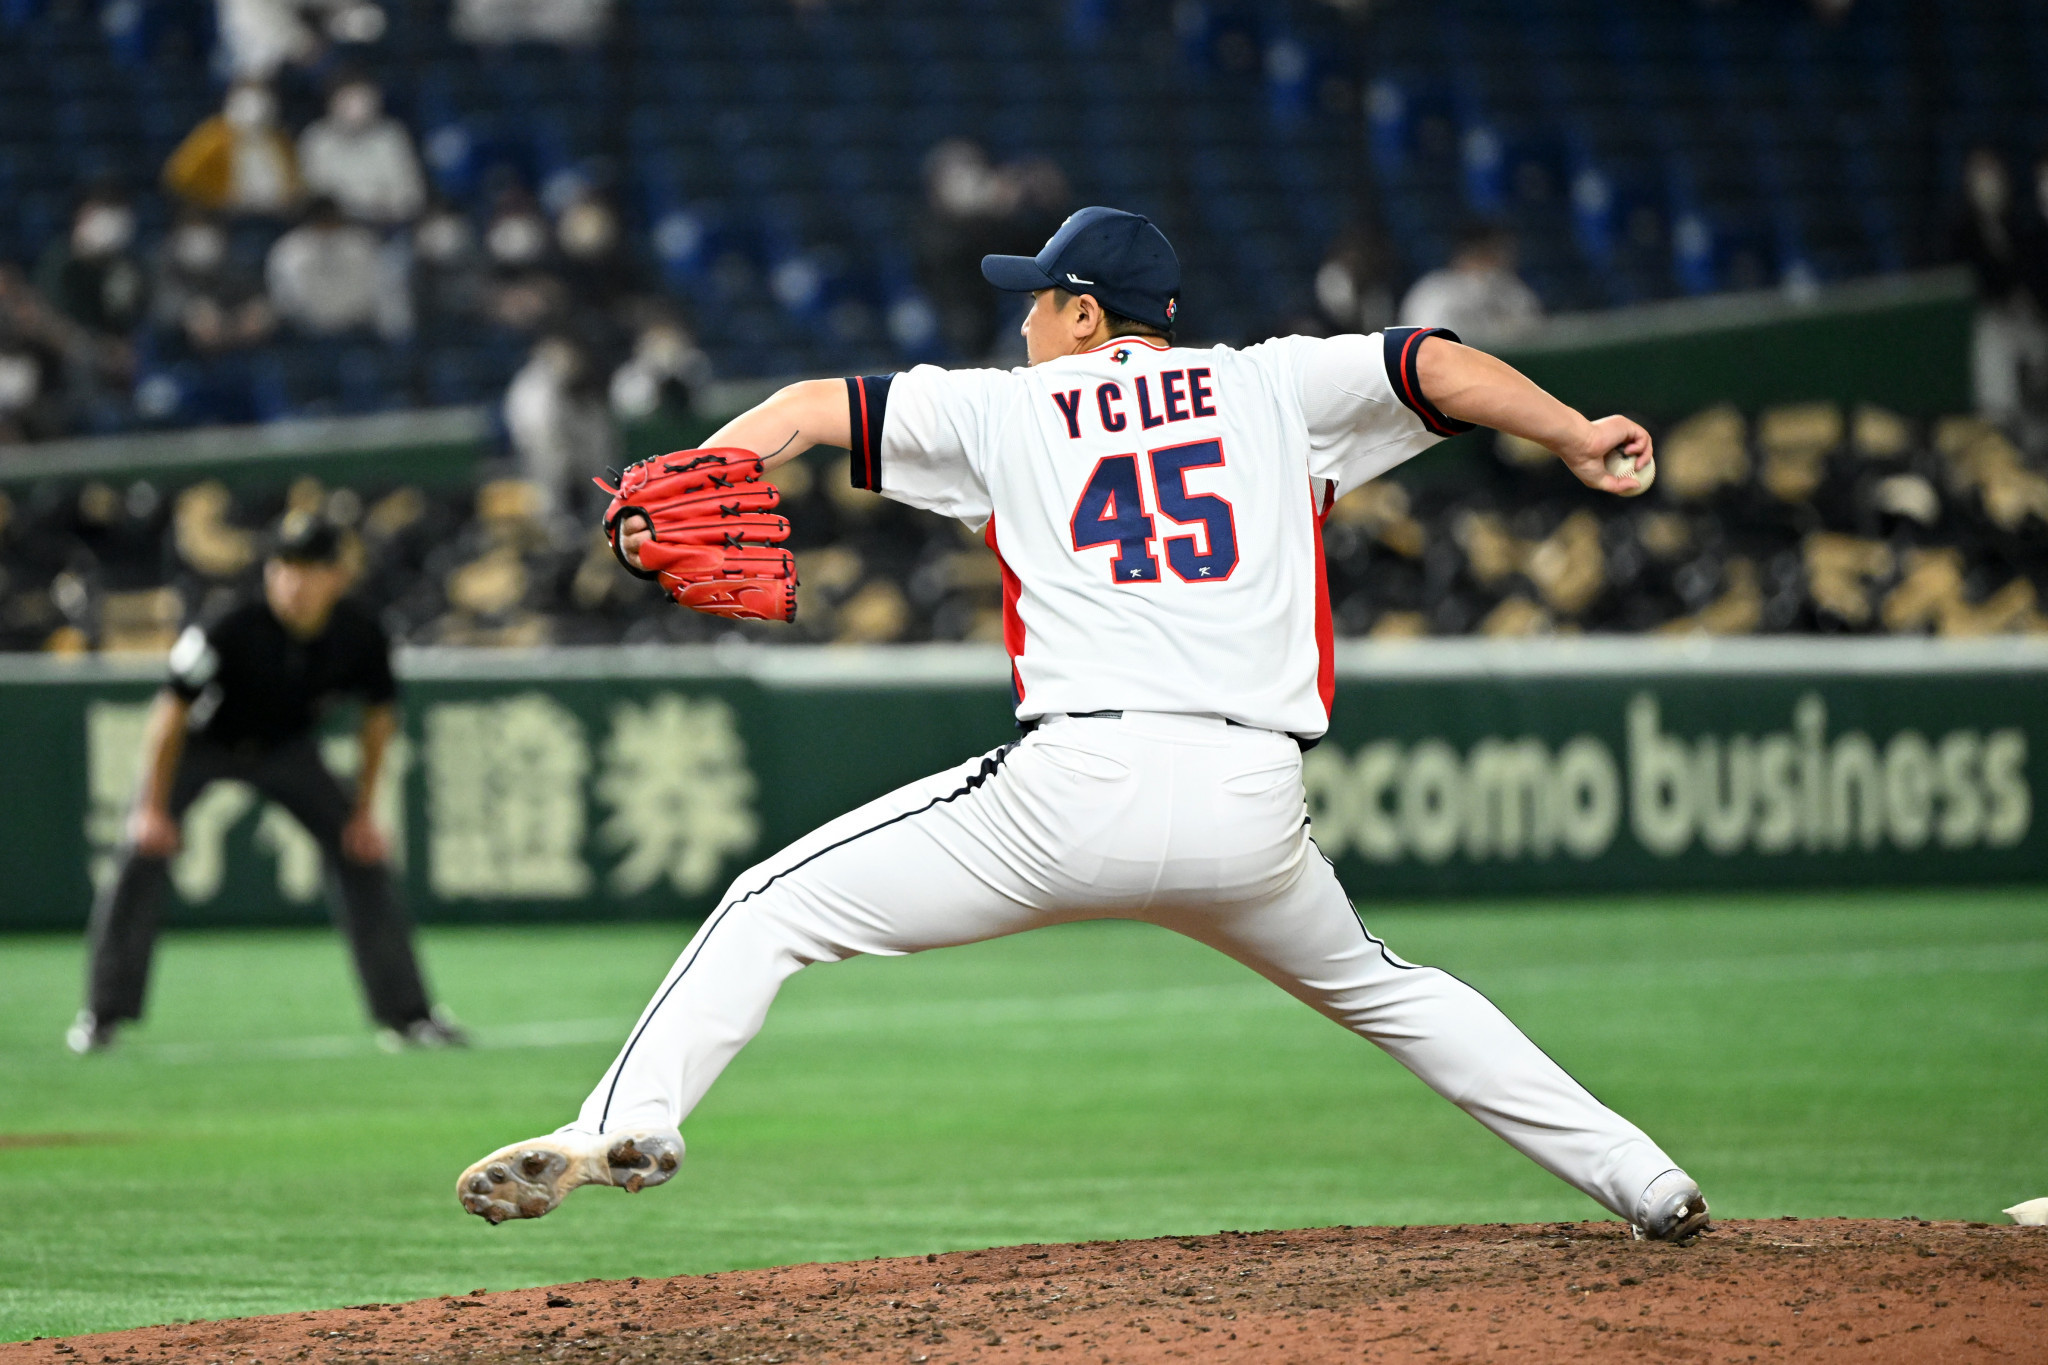 Lee Yong-chan pitching in South Korea's World Baseball Classic defeat to Australia ©Getty Images